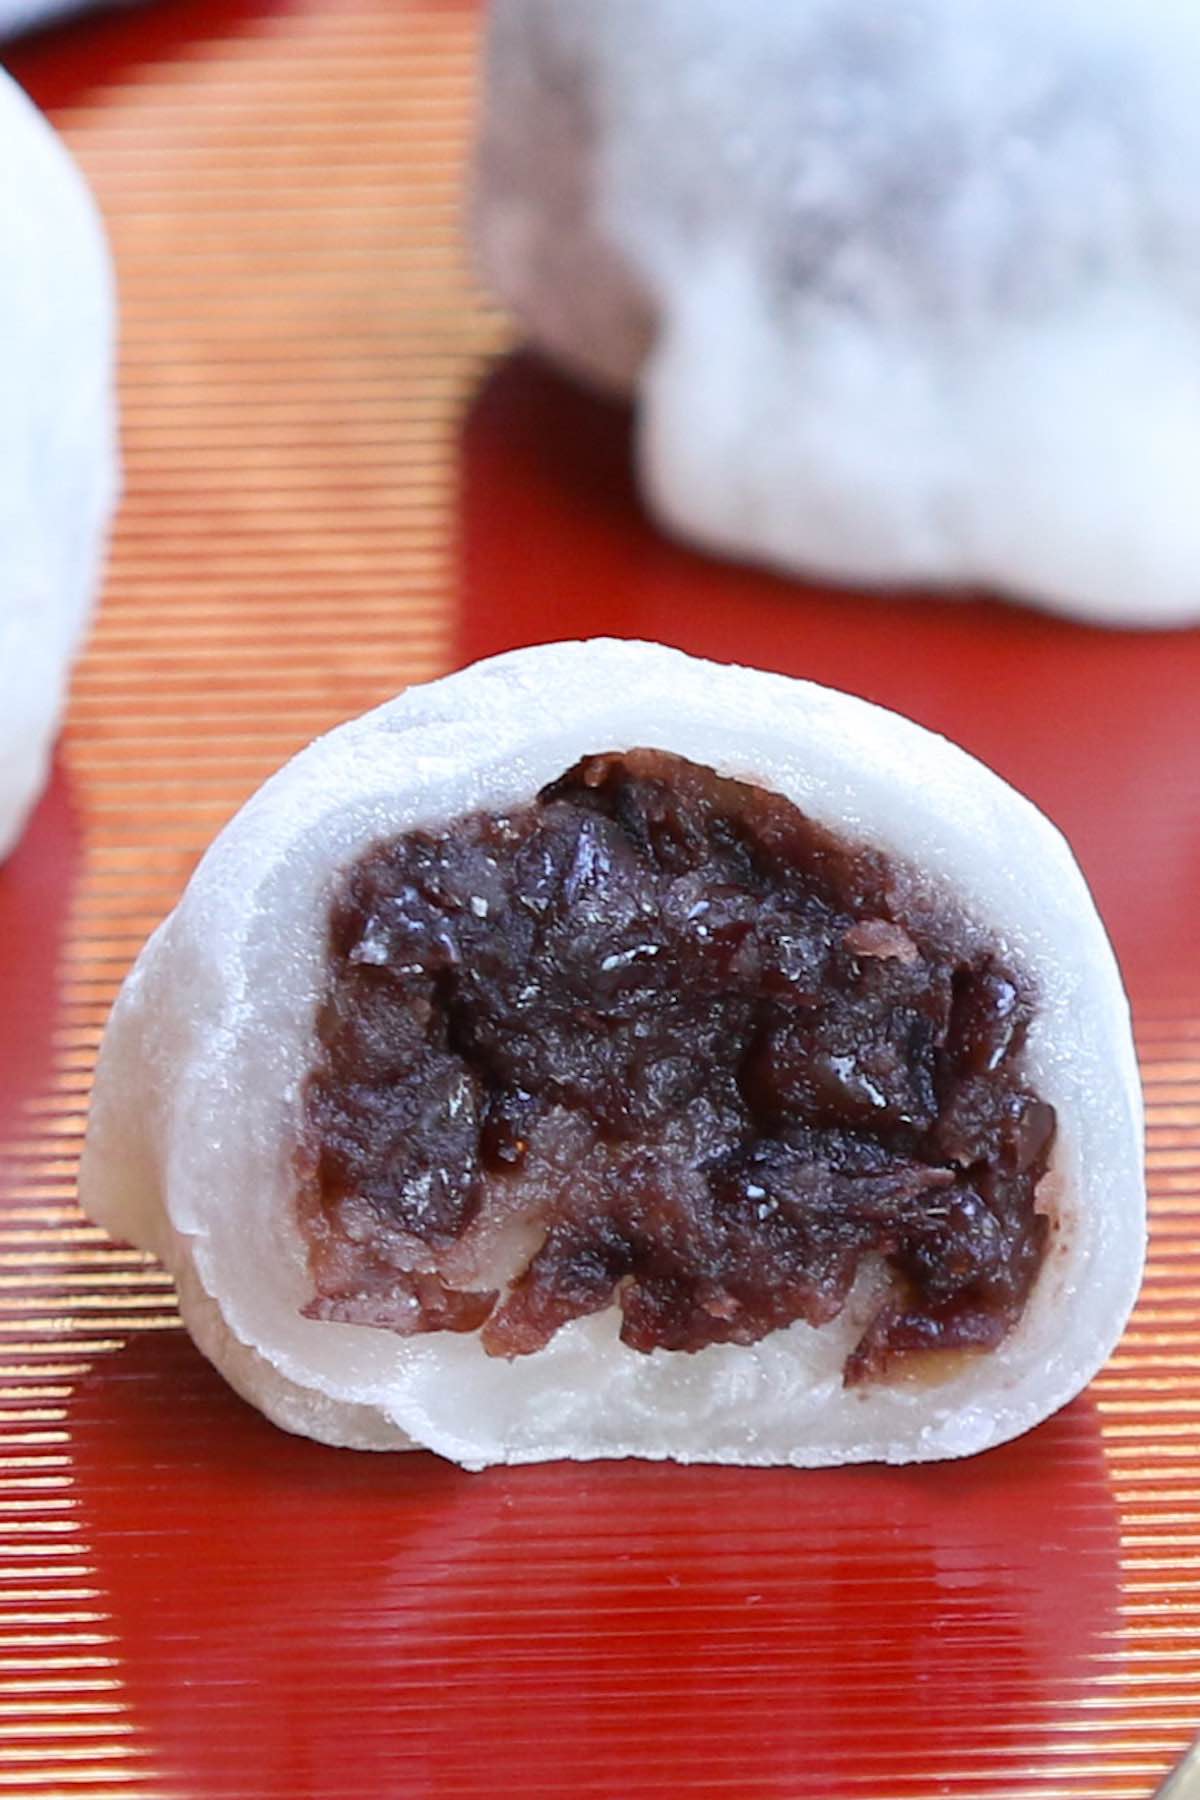 25 Popular Japanese Desserts That Are Easy to Make